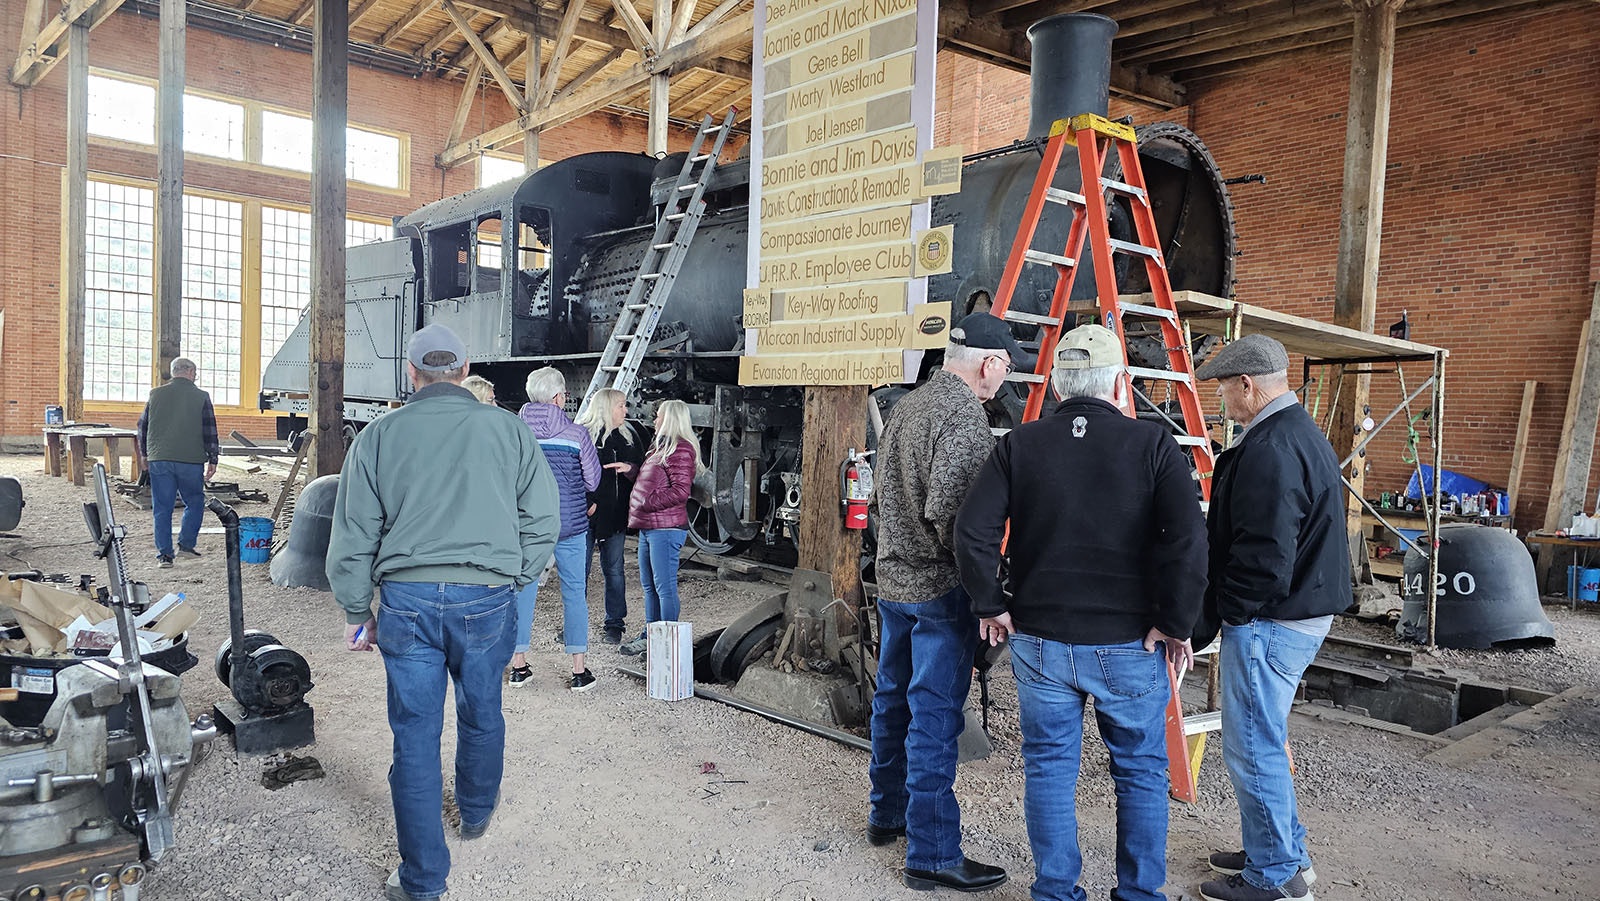 A group of people gather to look at 4420, a 110-year-old switch steam engine that's being restored in Evanston at the Roundhouse and Railyard.